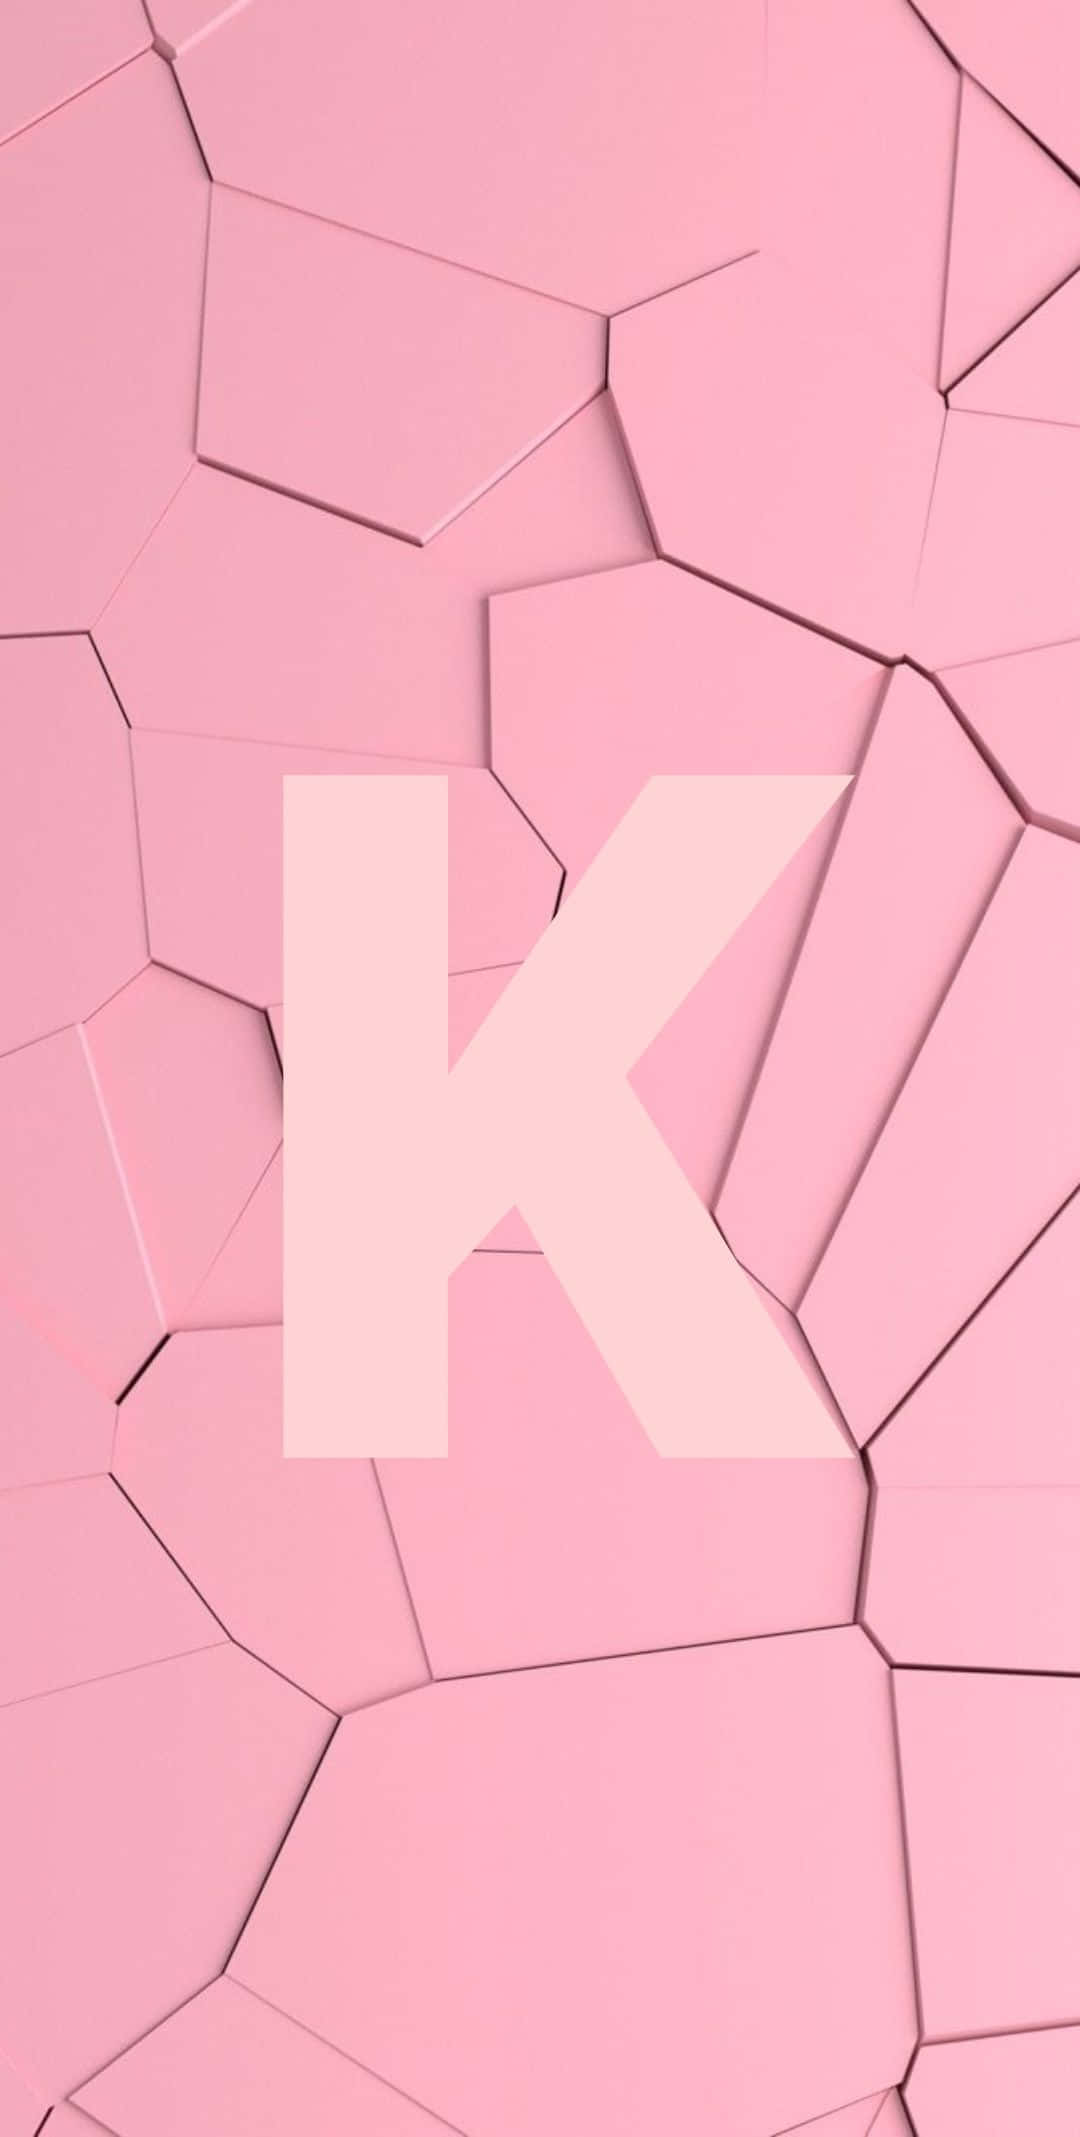 A Pink Background With The Letter K On It